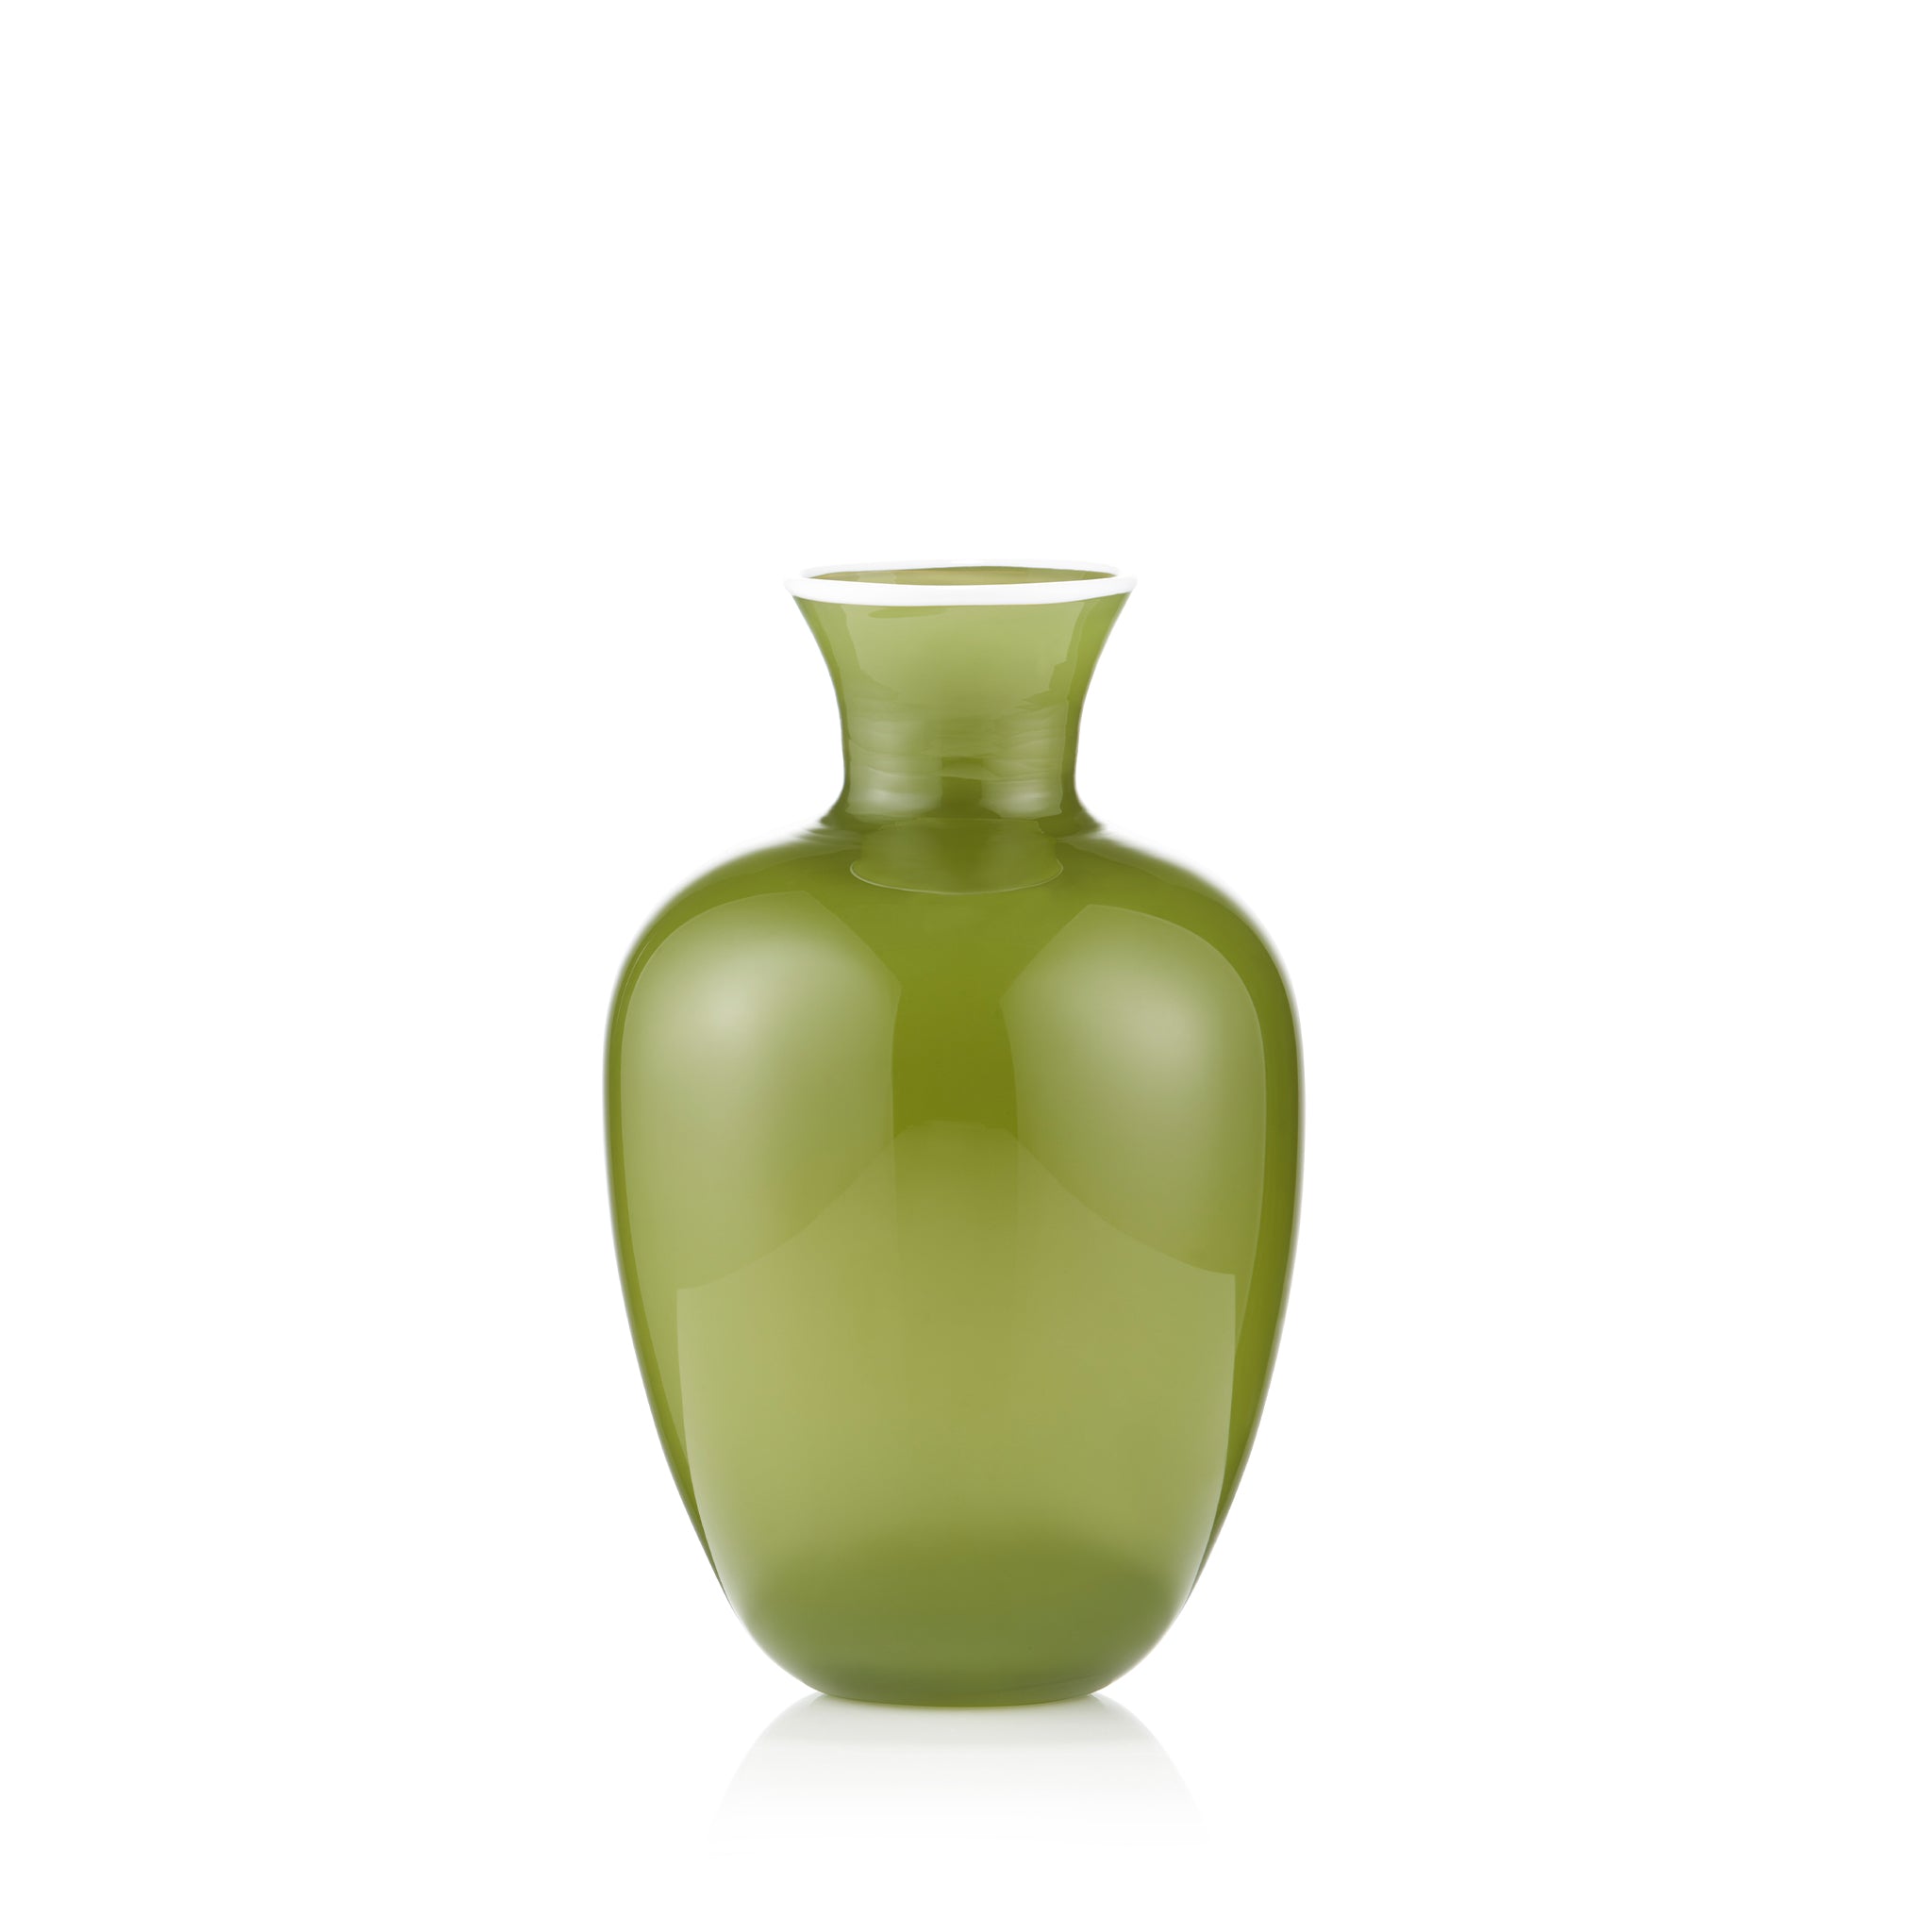 Handblown Glass Bumba Bedside Carafe and Glass Set in Apple Green, 0.5L